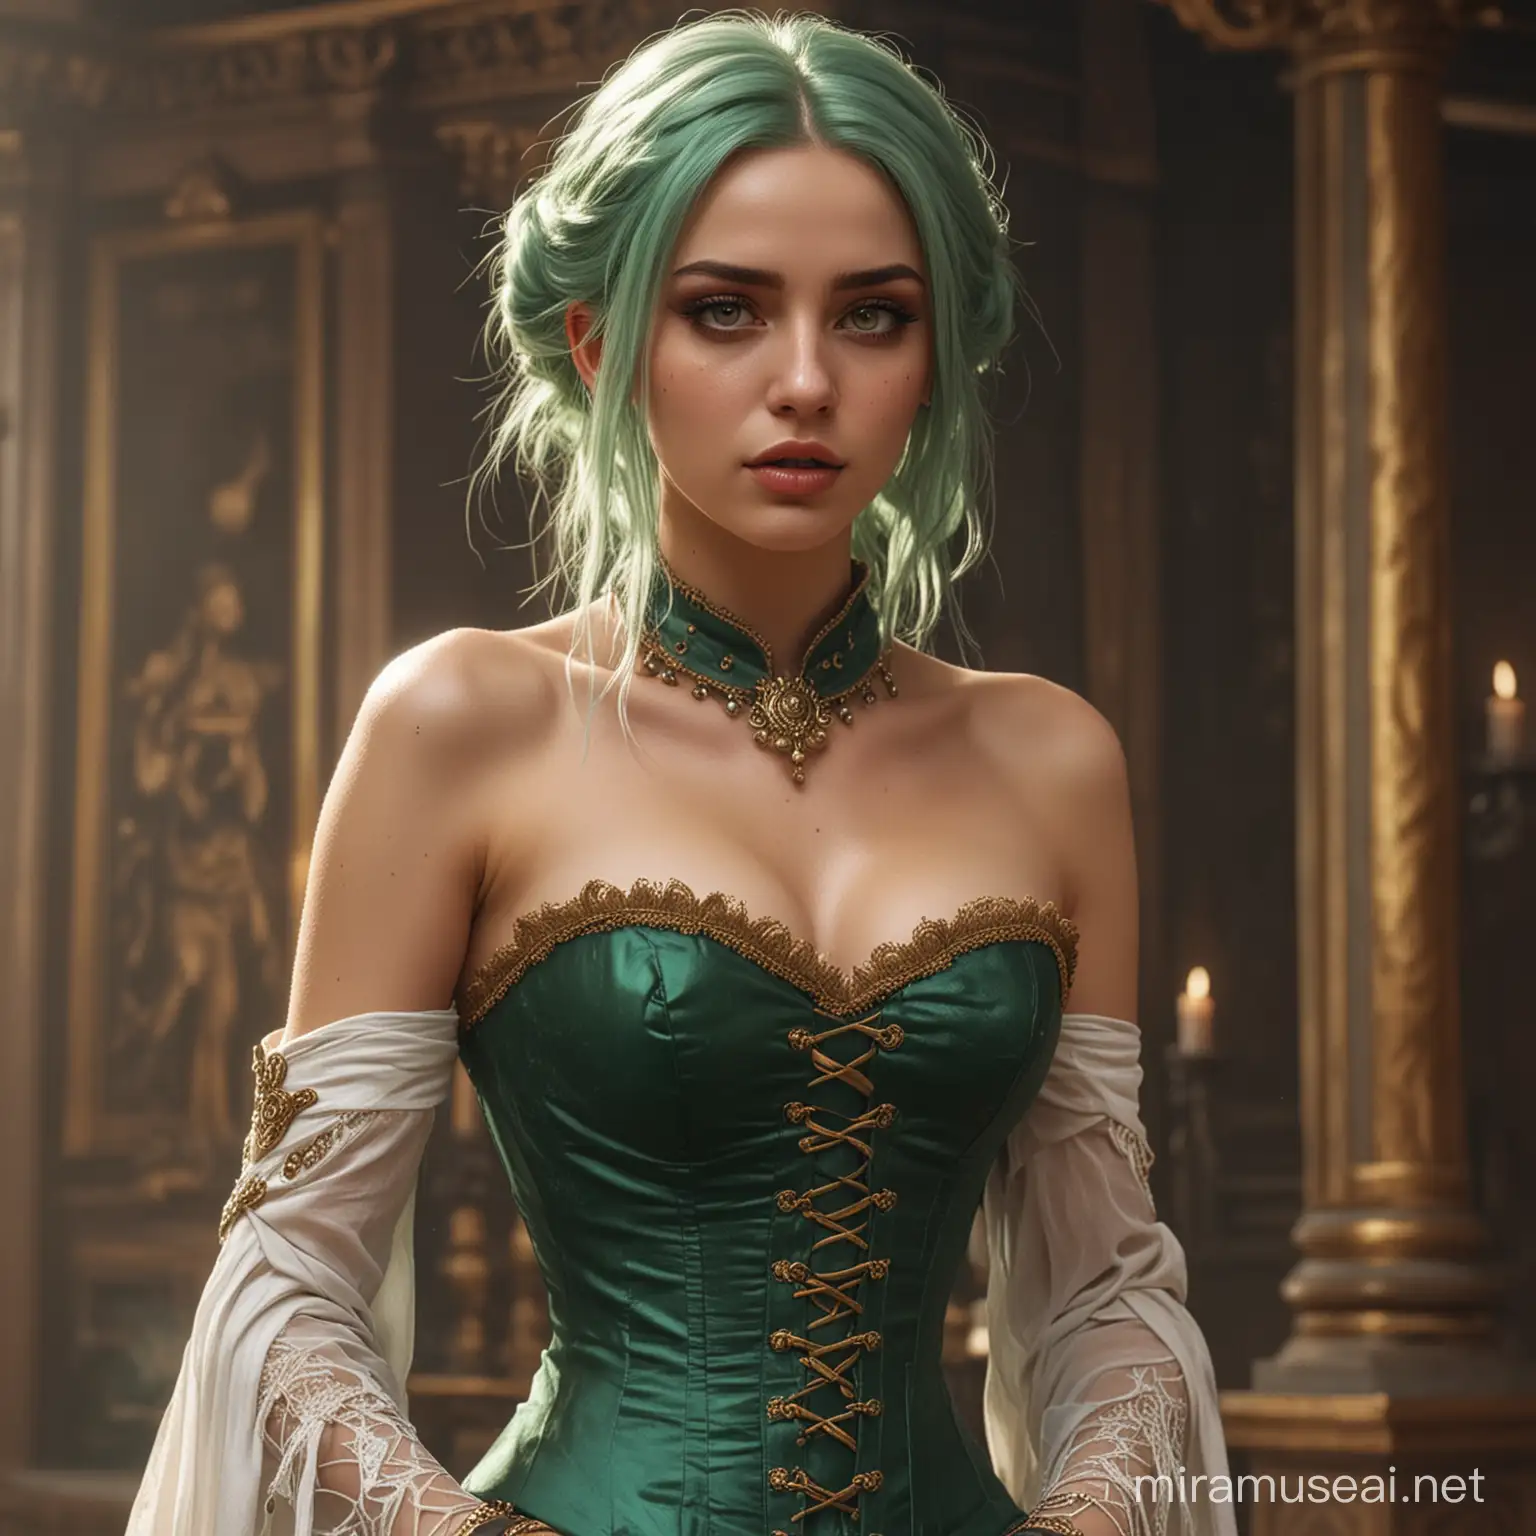 Elegant Villainous Noble Lady with Green Hair and Golden Eyes in Revealing Dress